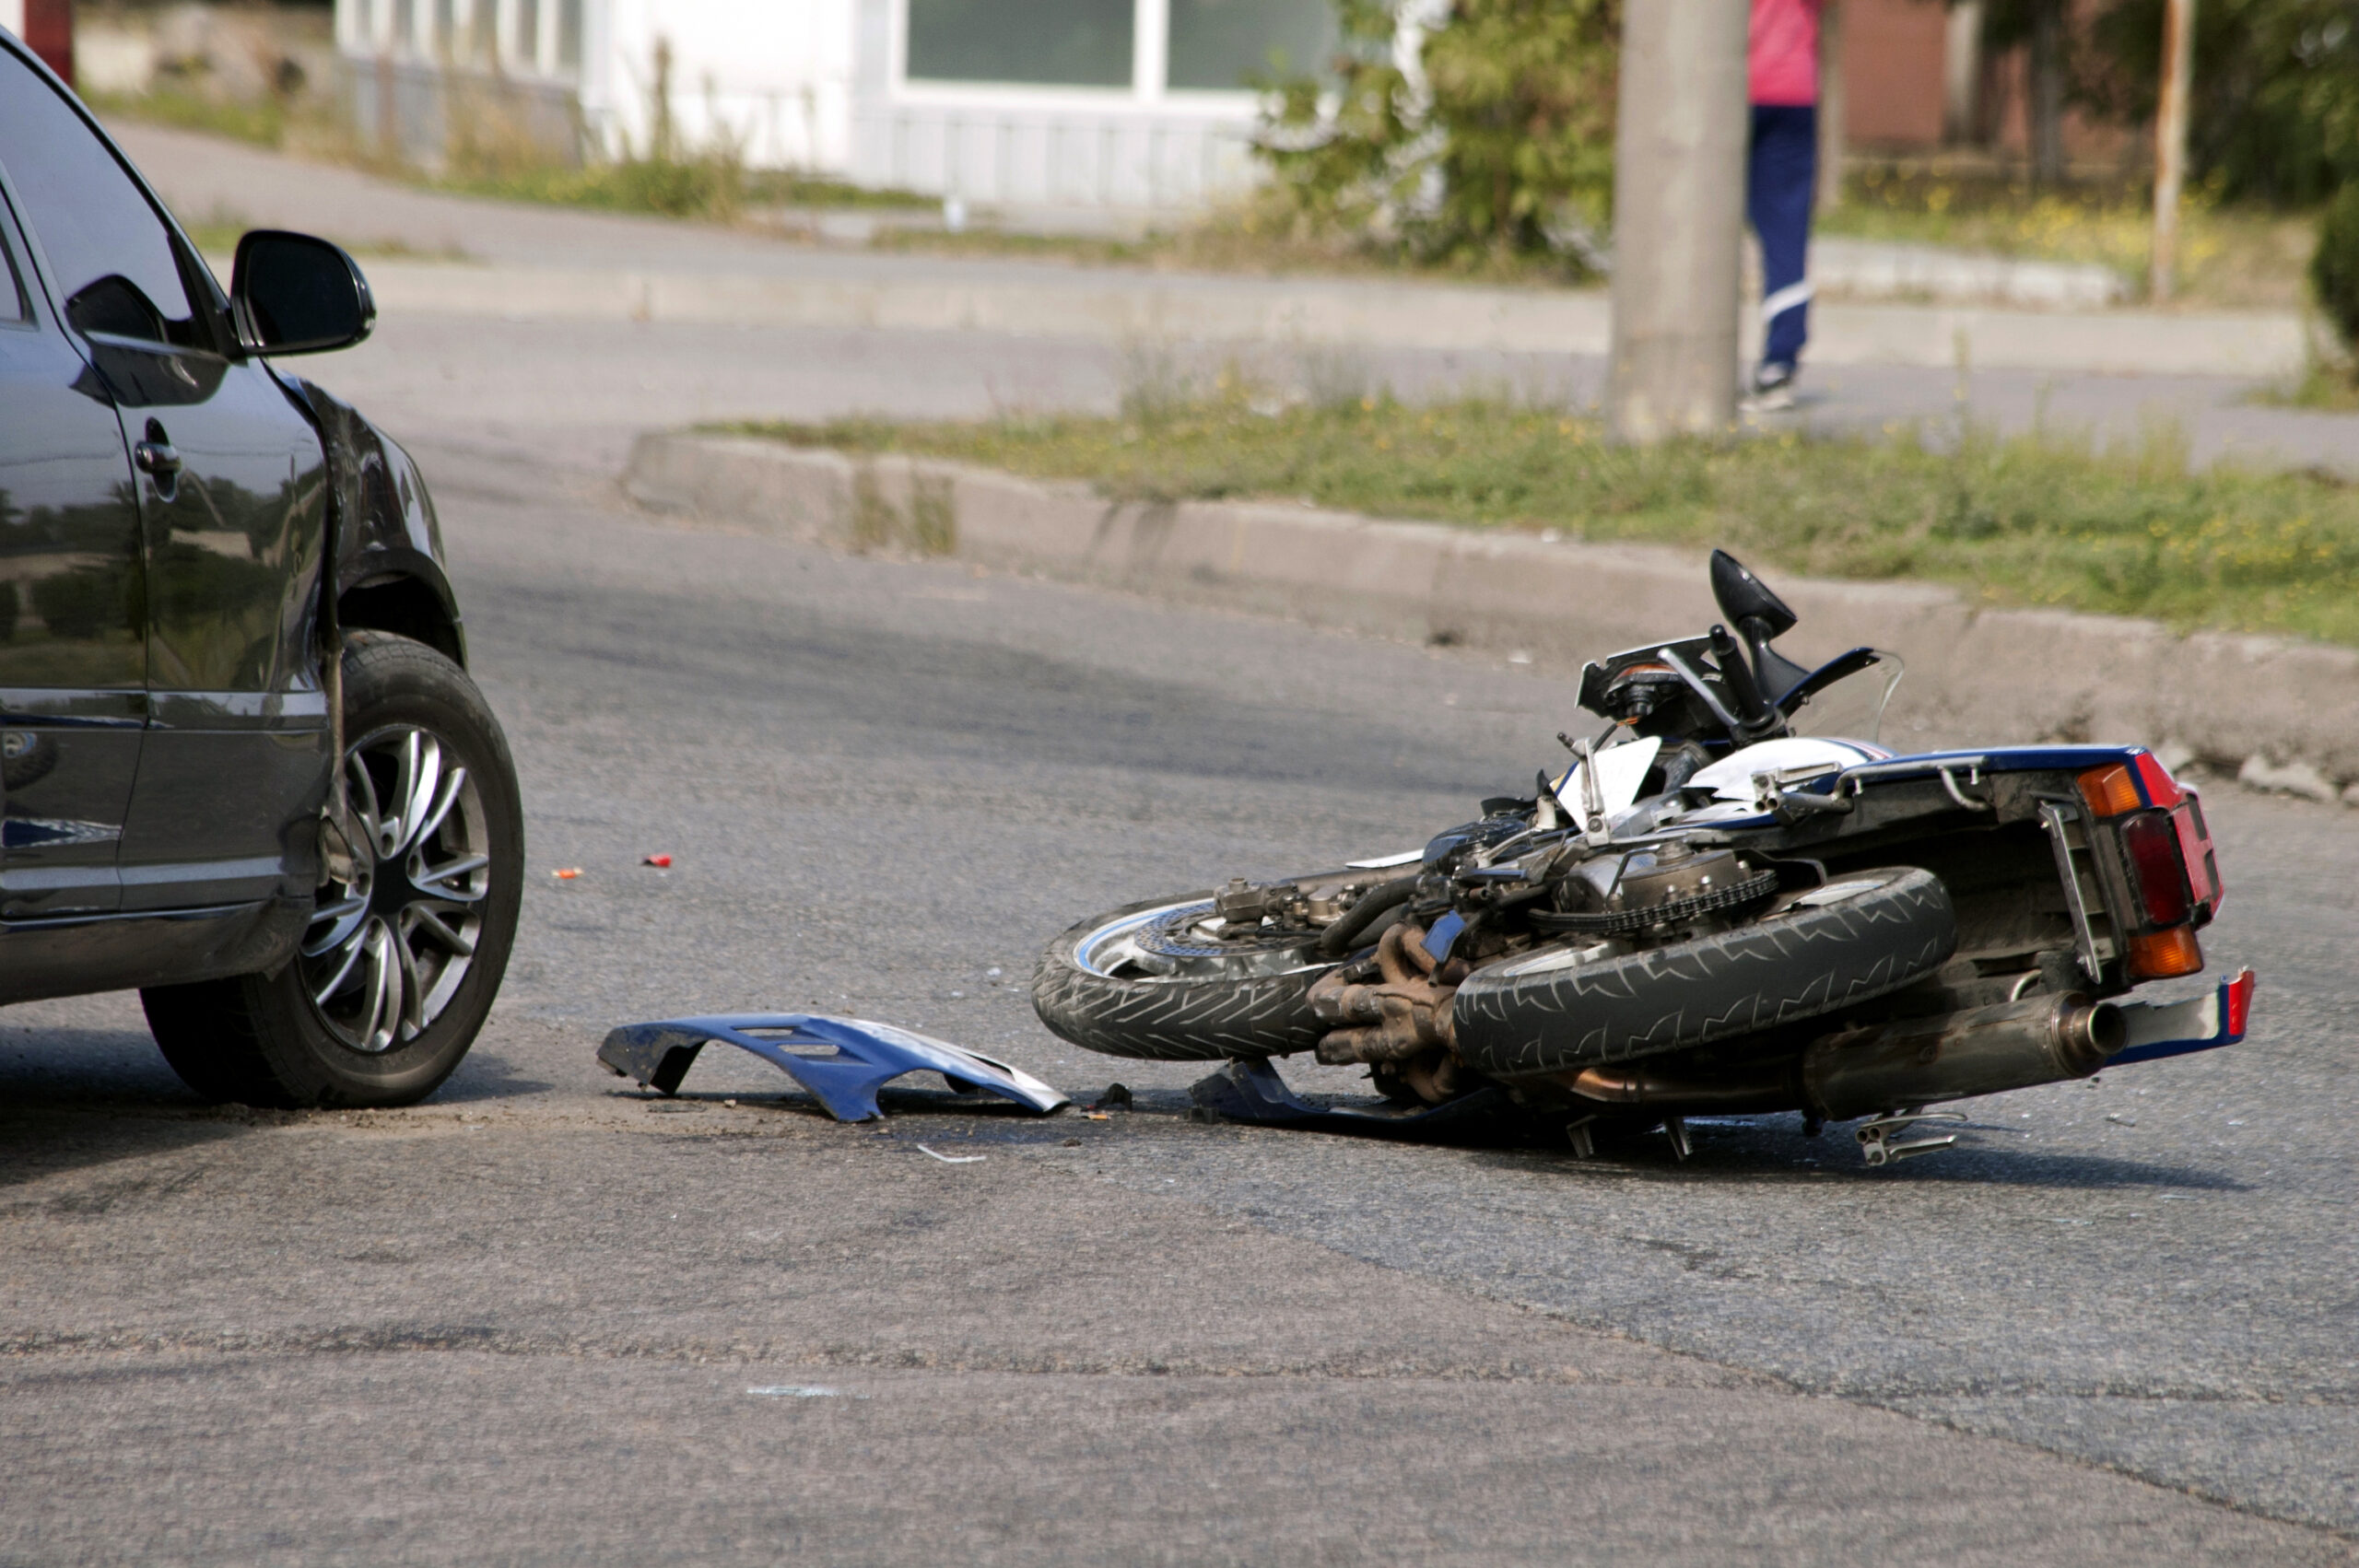 Understanding the Statute of Limitations for Filing a Motorcycle Accident Lawsuit in Georgia